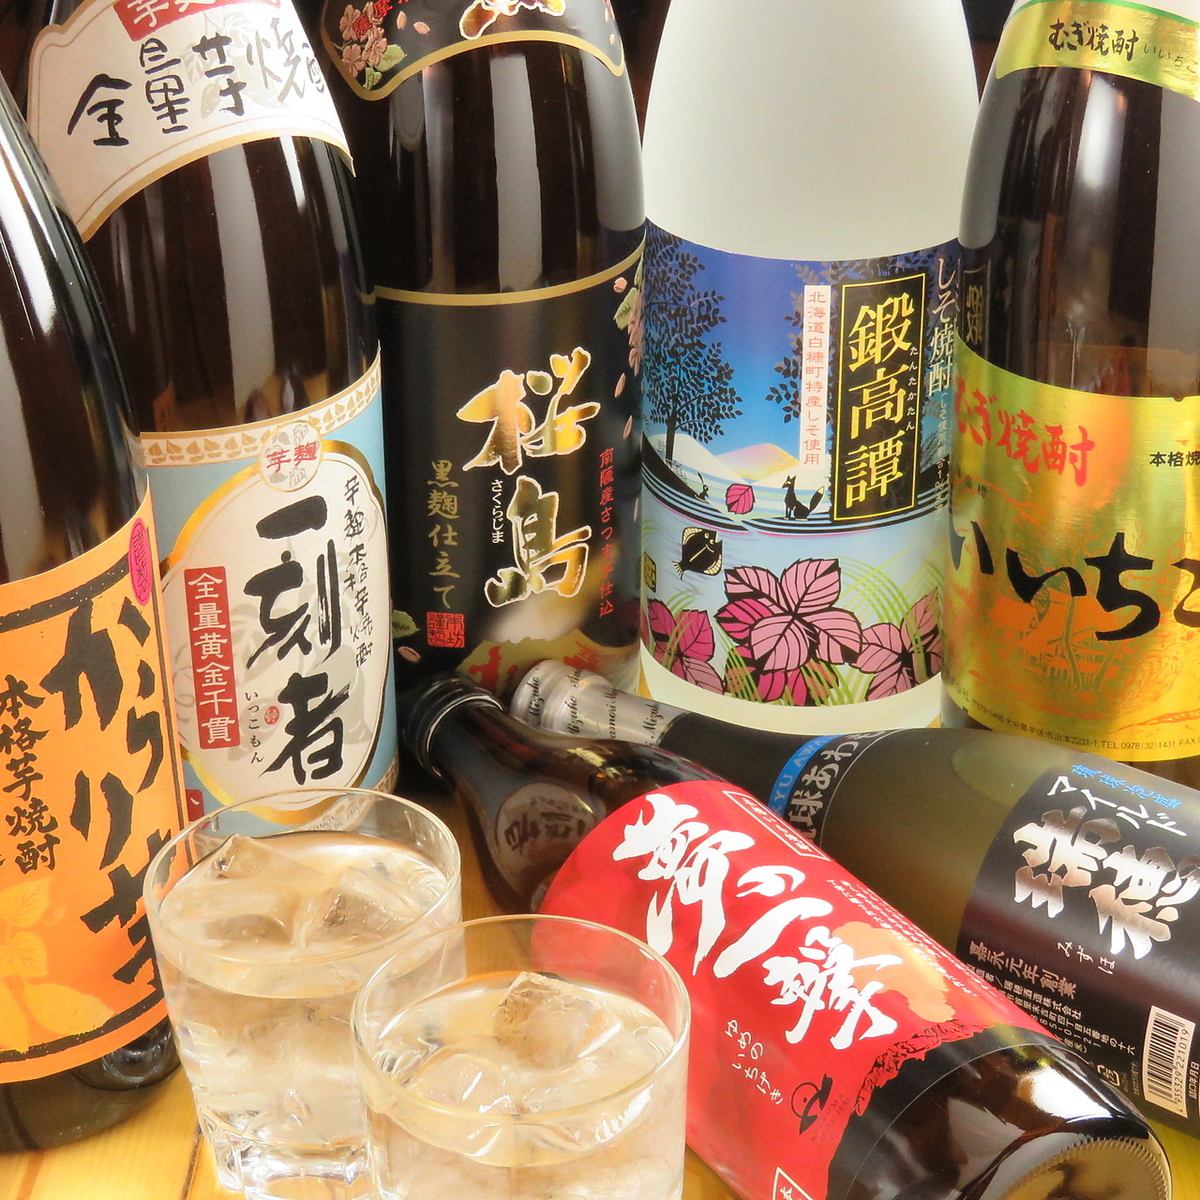 You can enjoy sake at a better price by using coupons♪